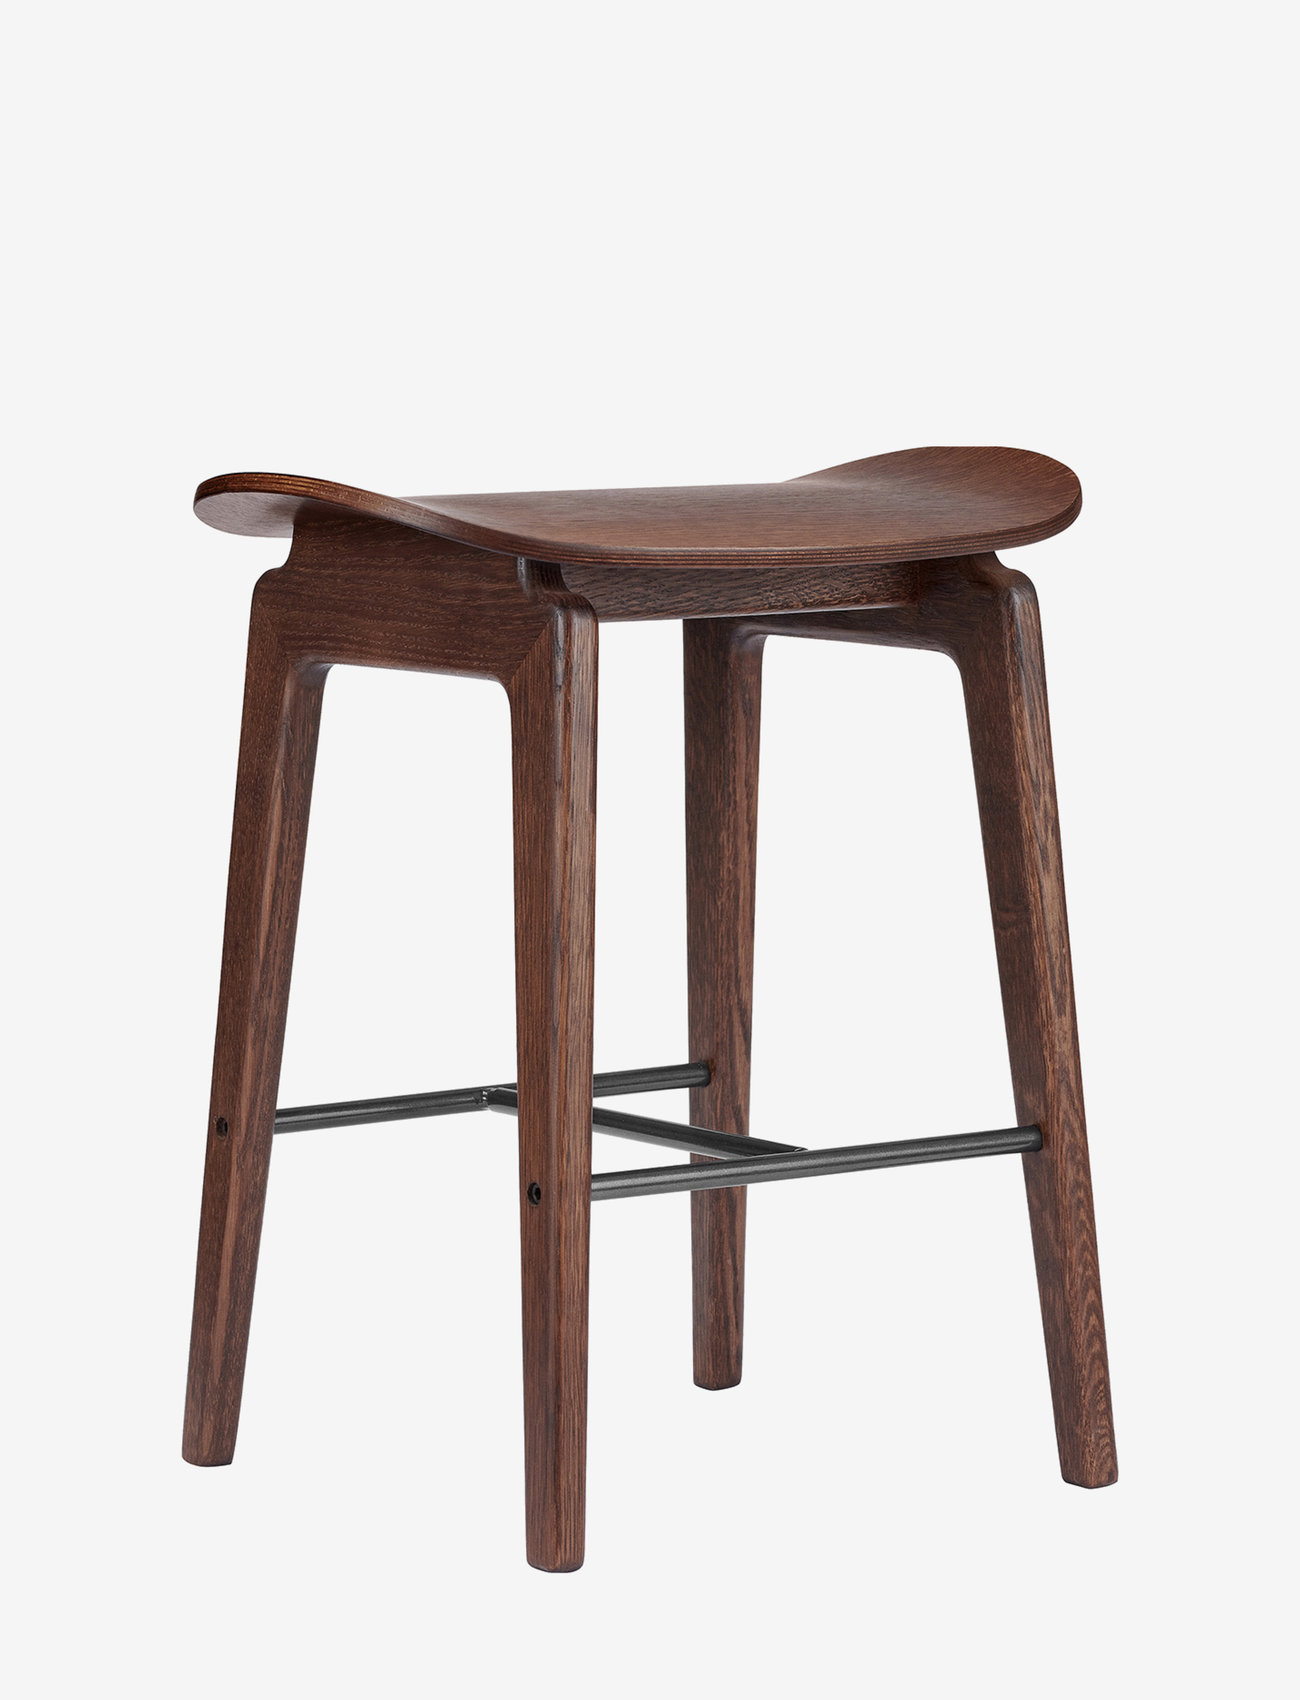 NORR11 - NY11 Stool - chairs & stools - dark stained - 1